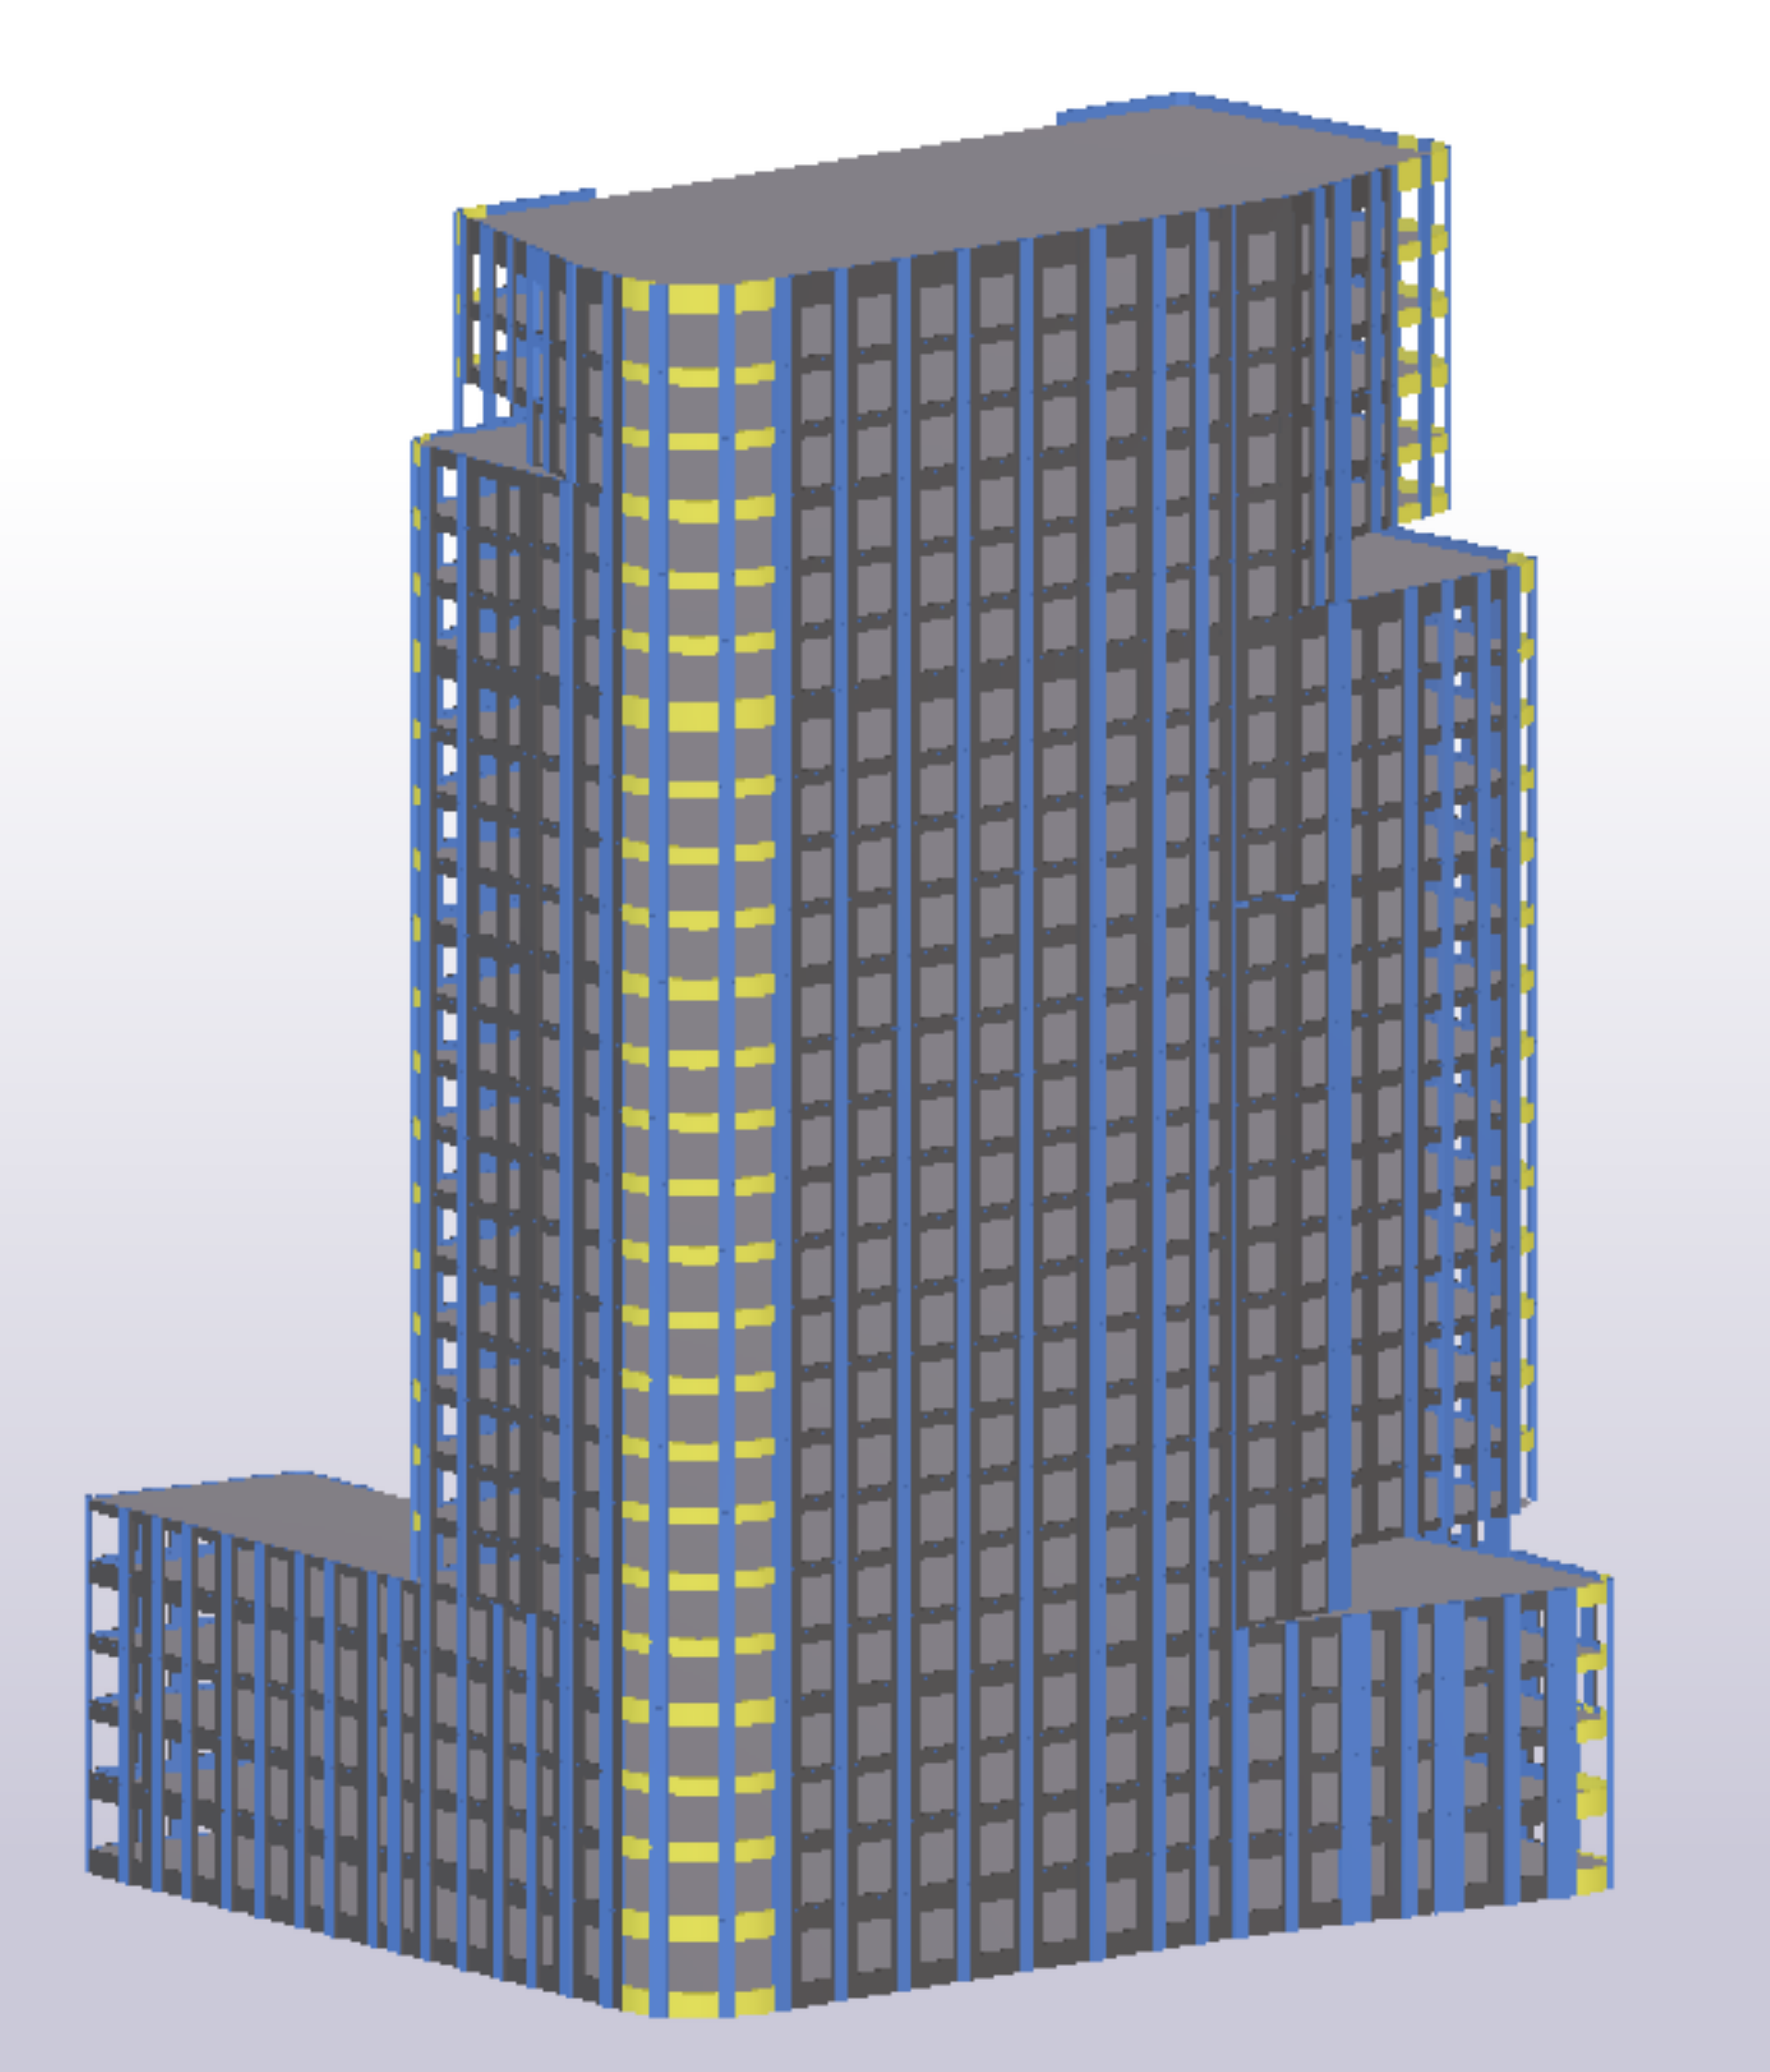 Estimating Model of an Architectural Building